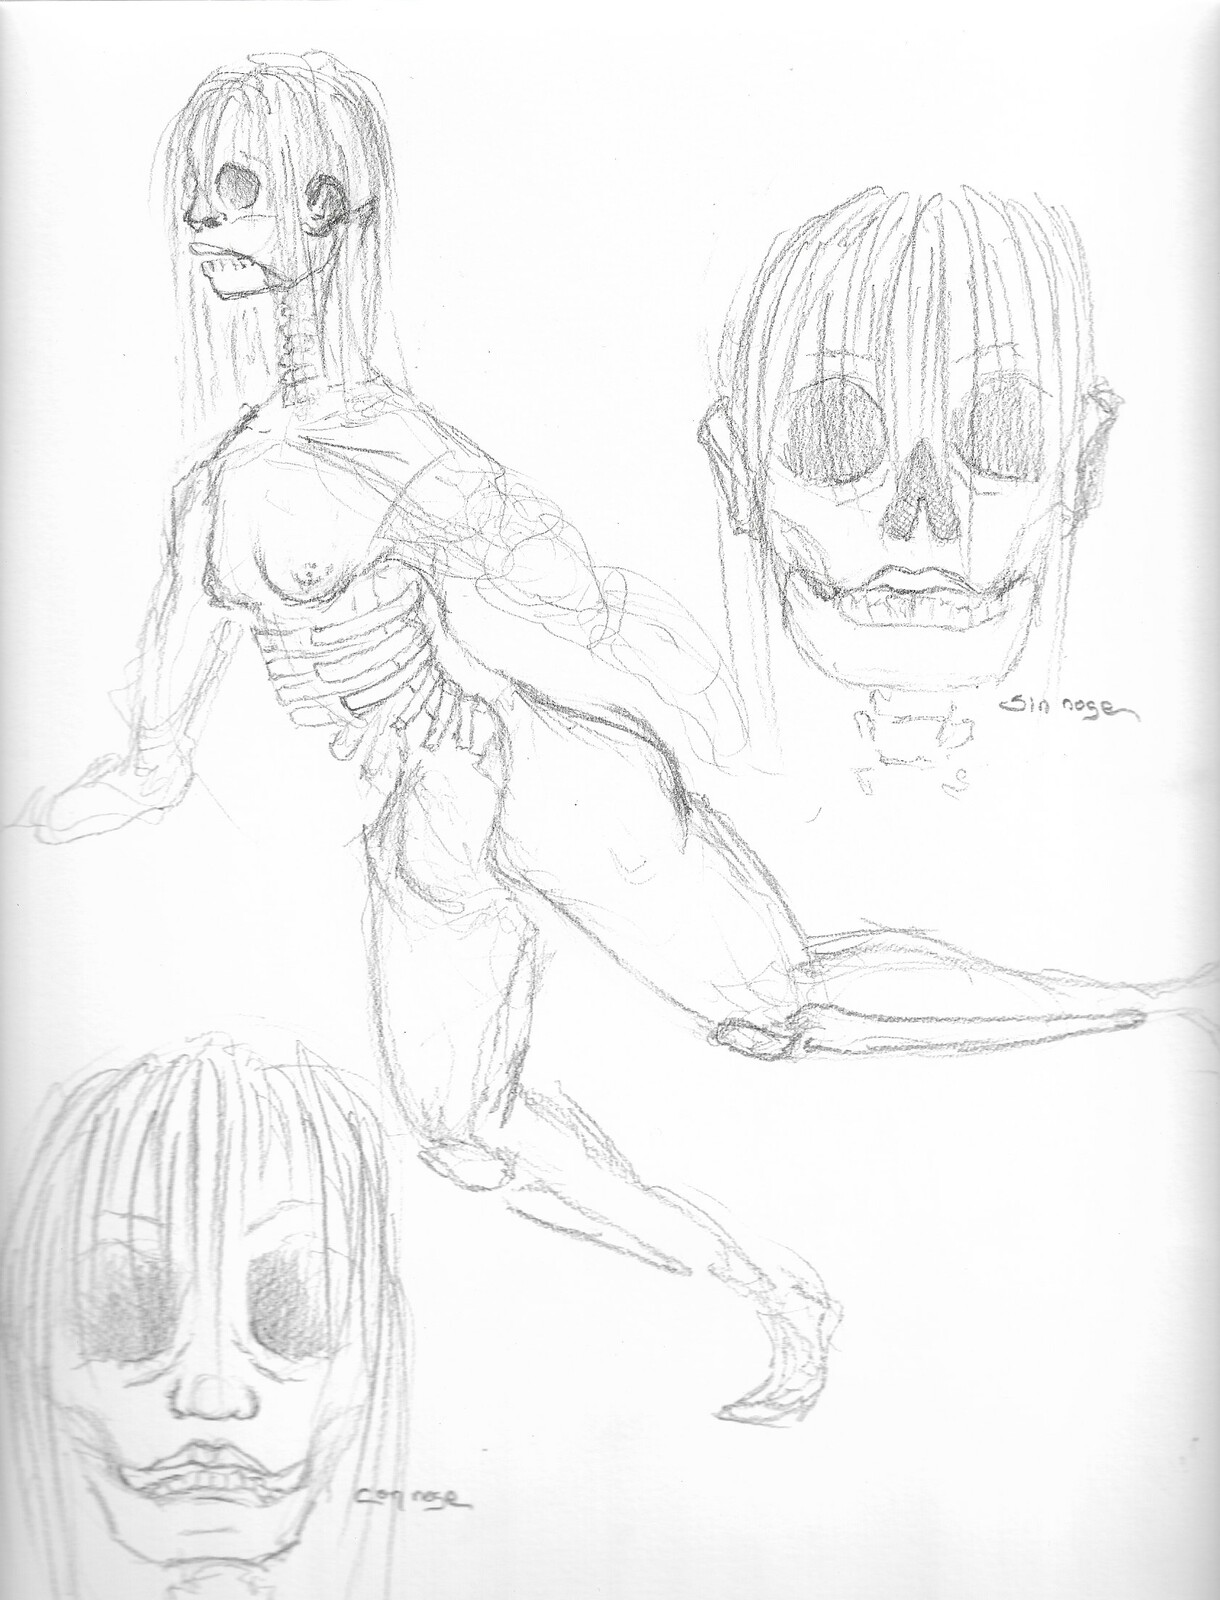 Exploring the anatomy and facial structure of the reanimated corpse concept. 